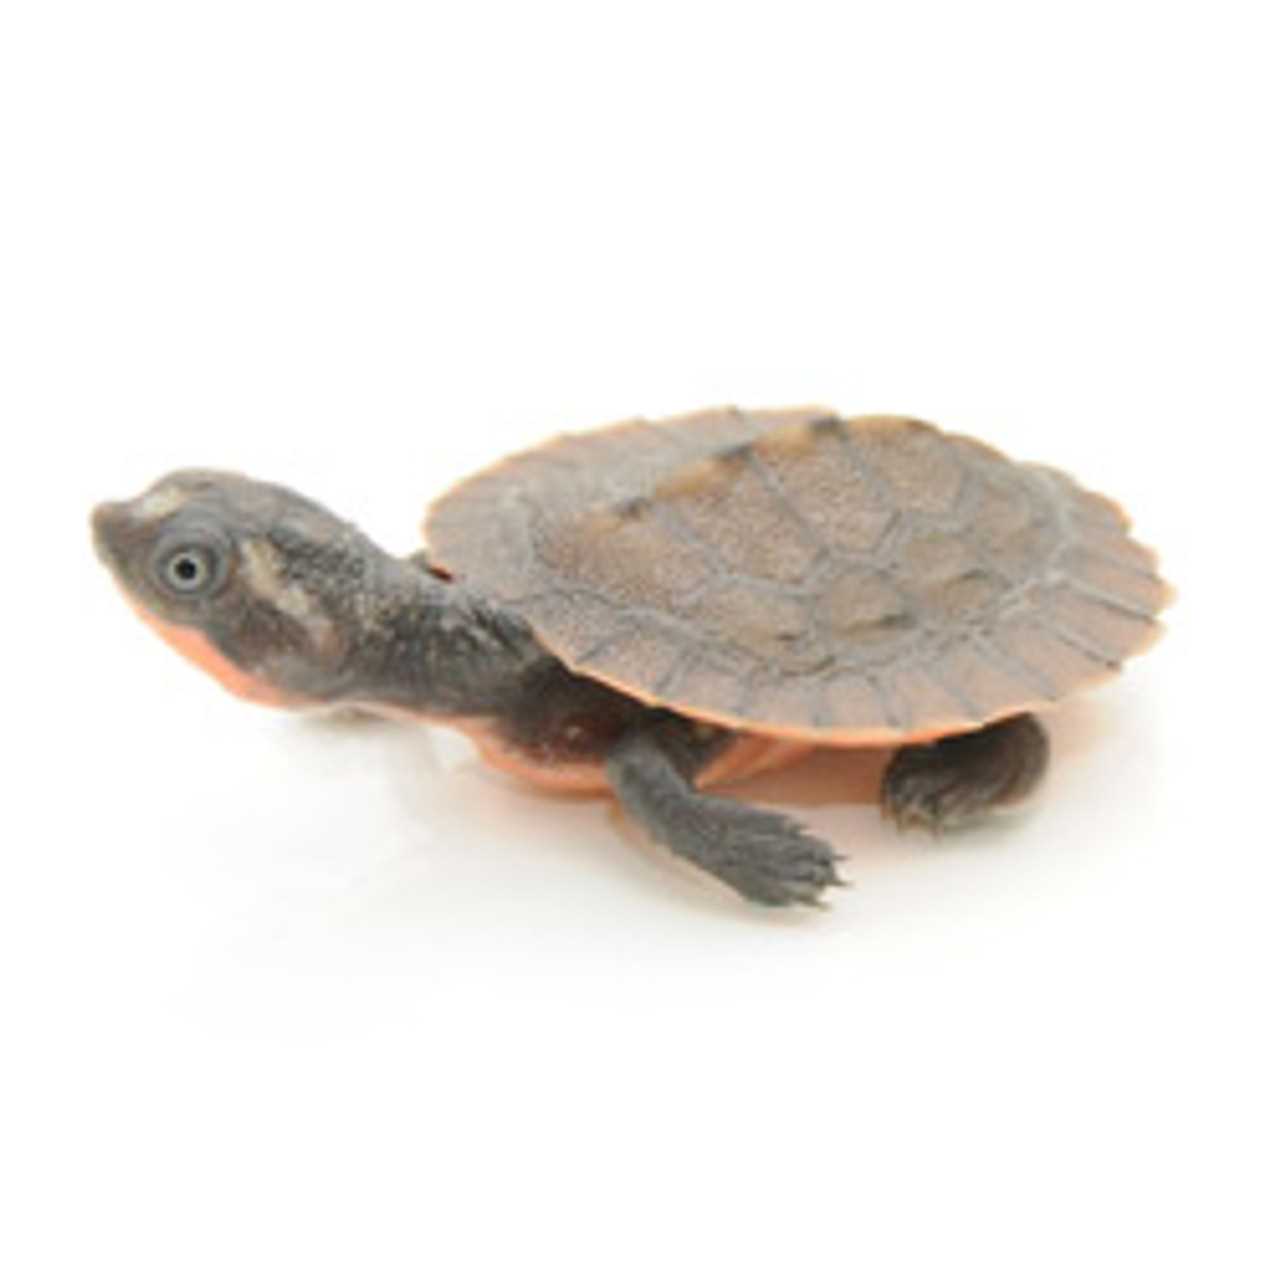 Pink belly snapping turtle